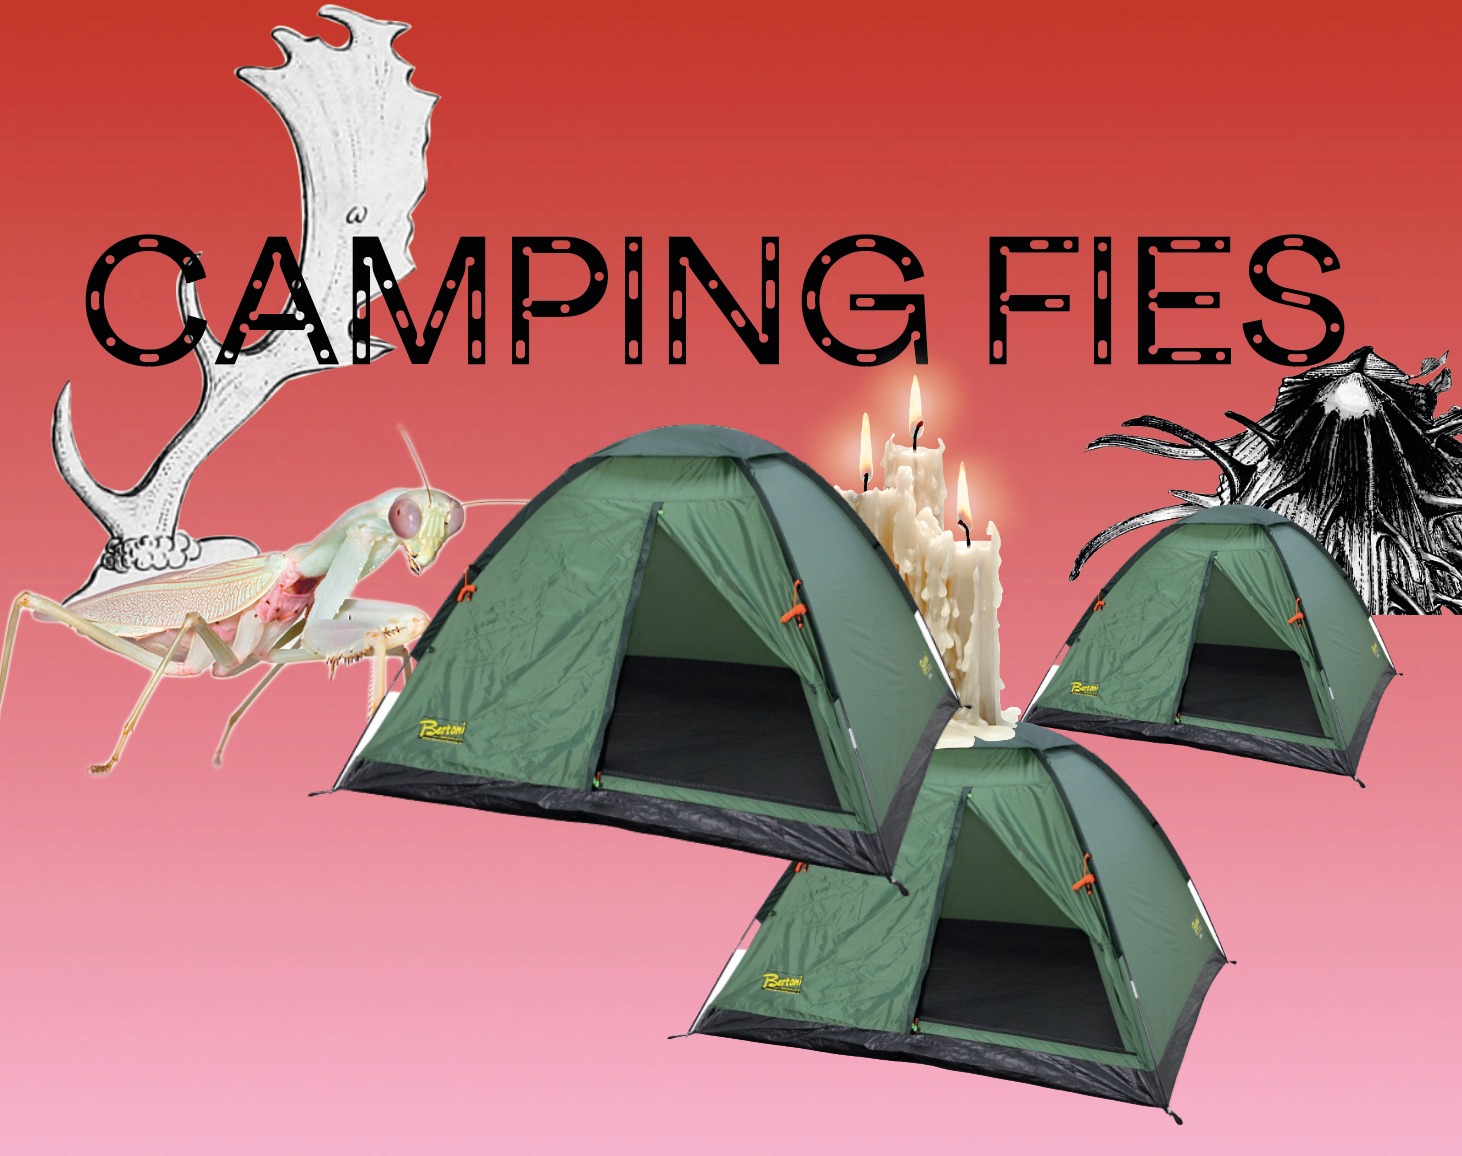 CAMPING AT CENTRALE FIES